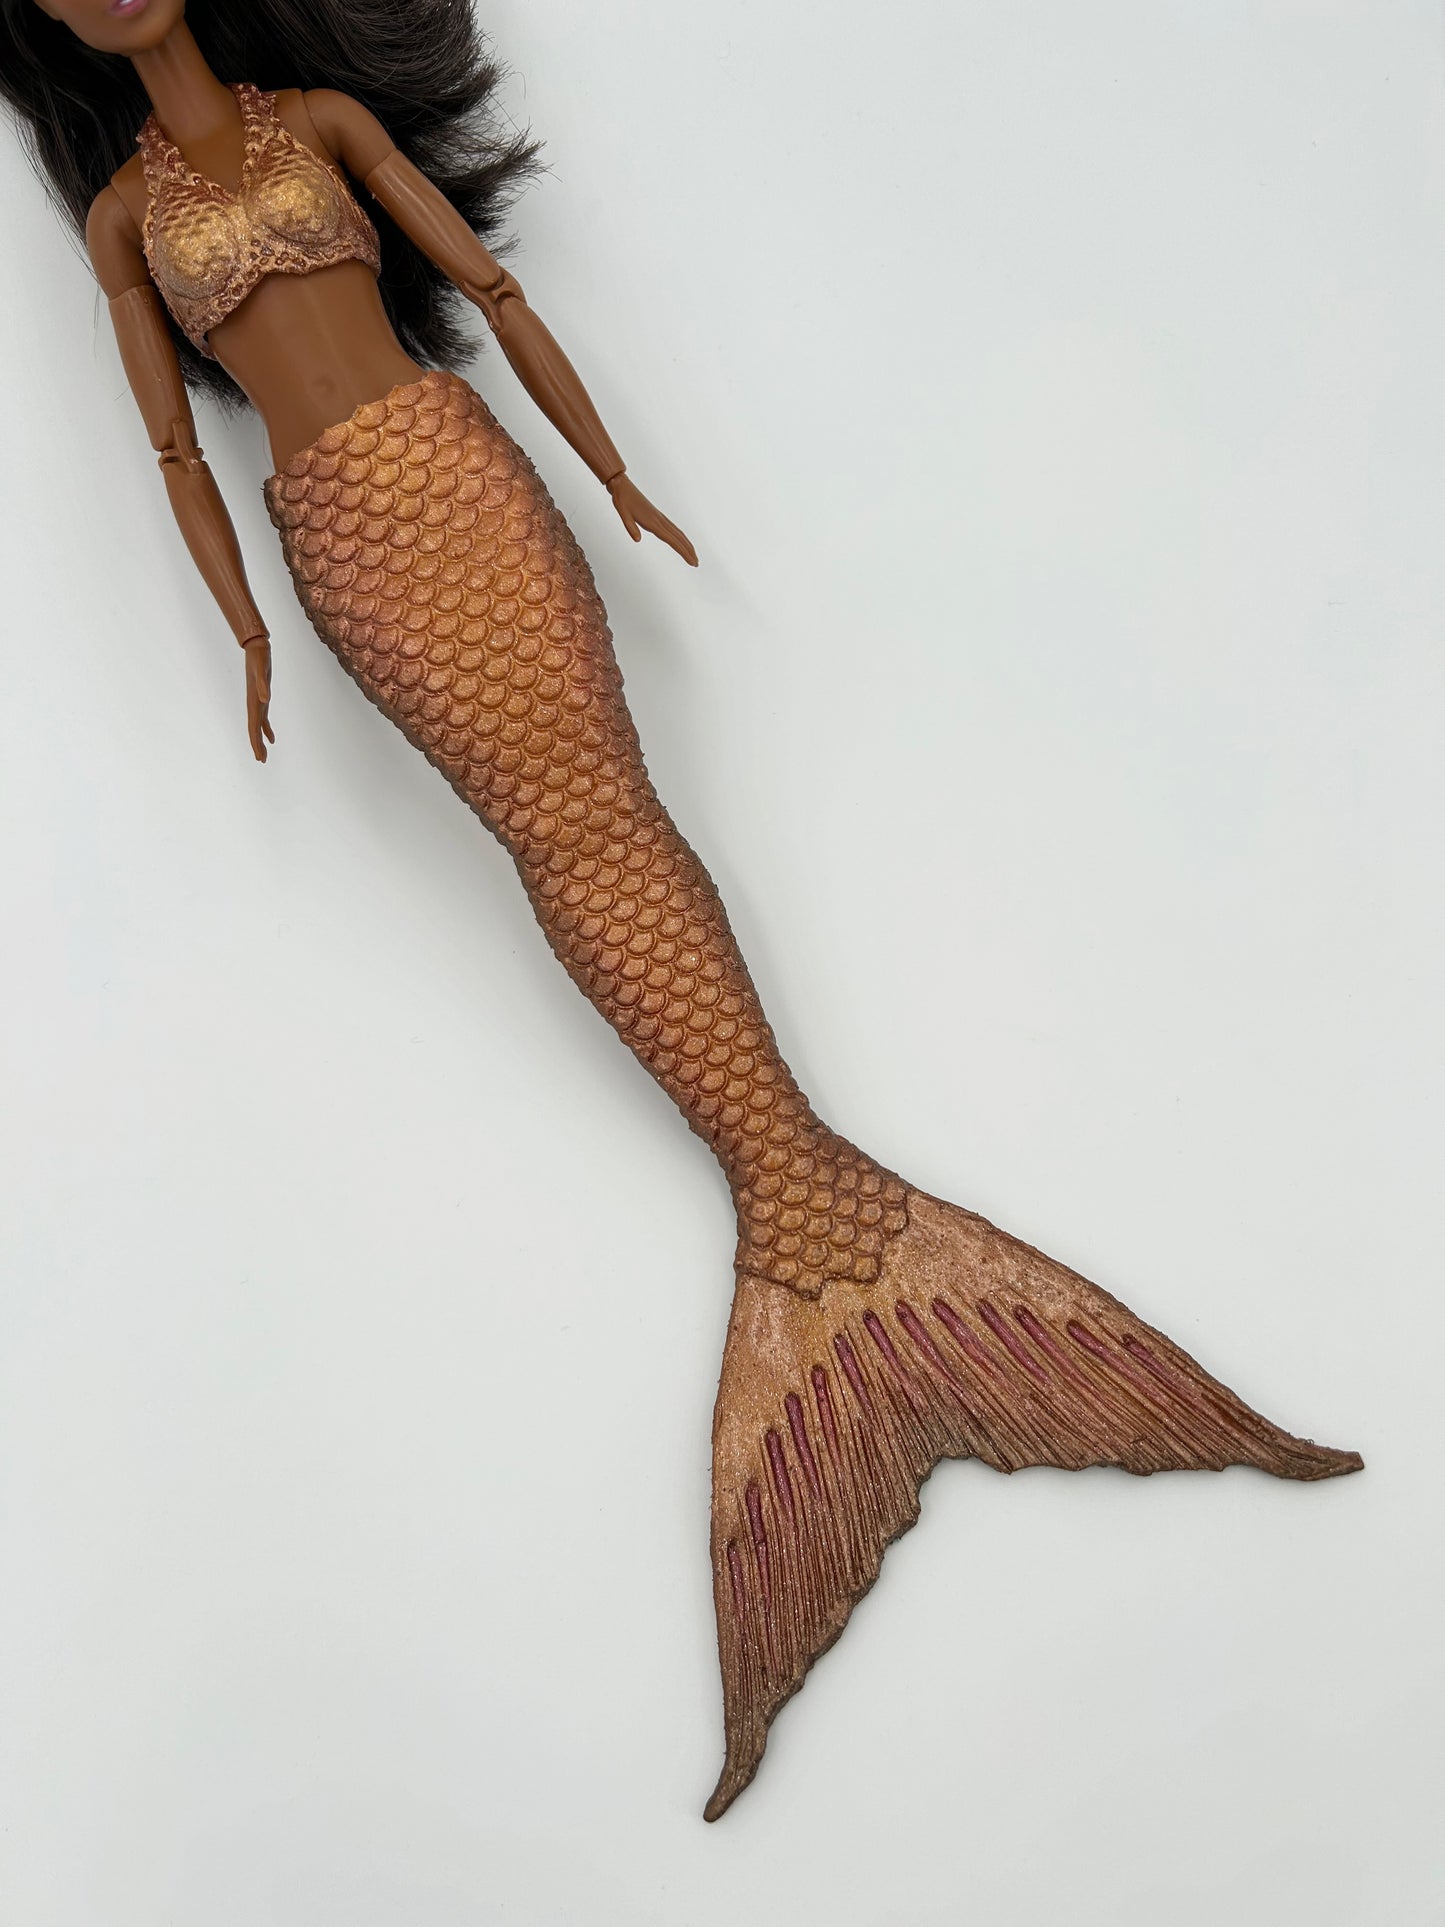 H2O silicone mermaid tail and bra for doll (doll not included)